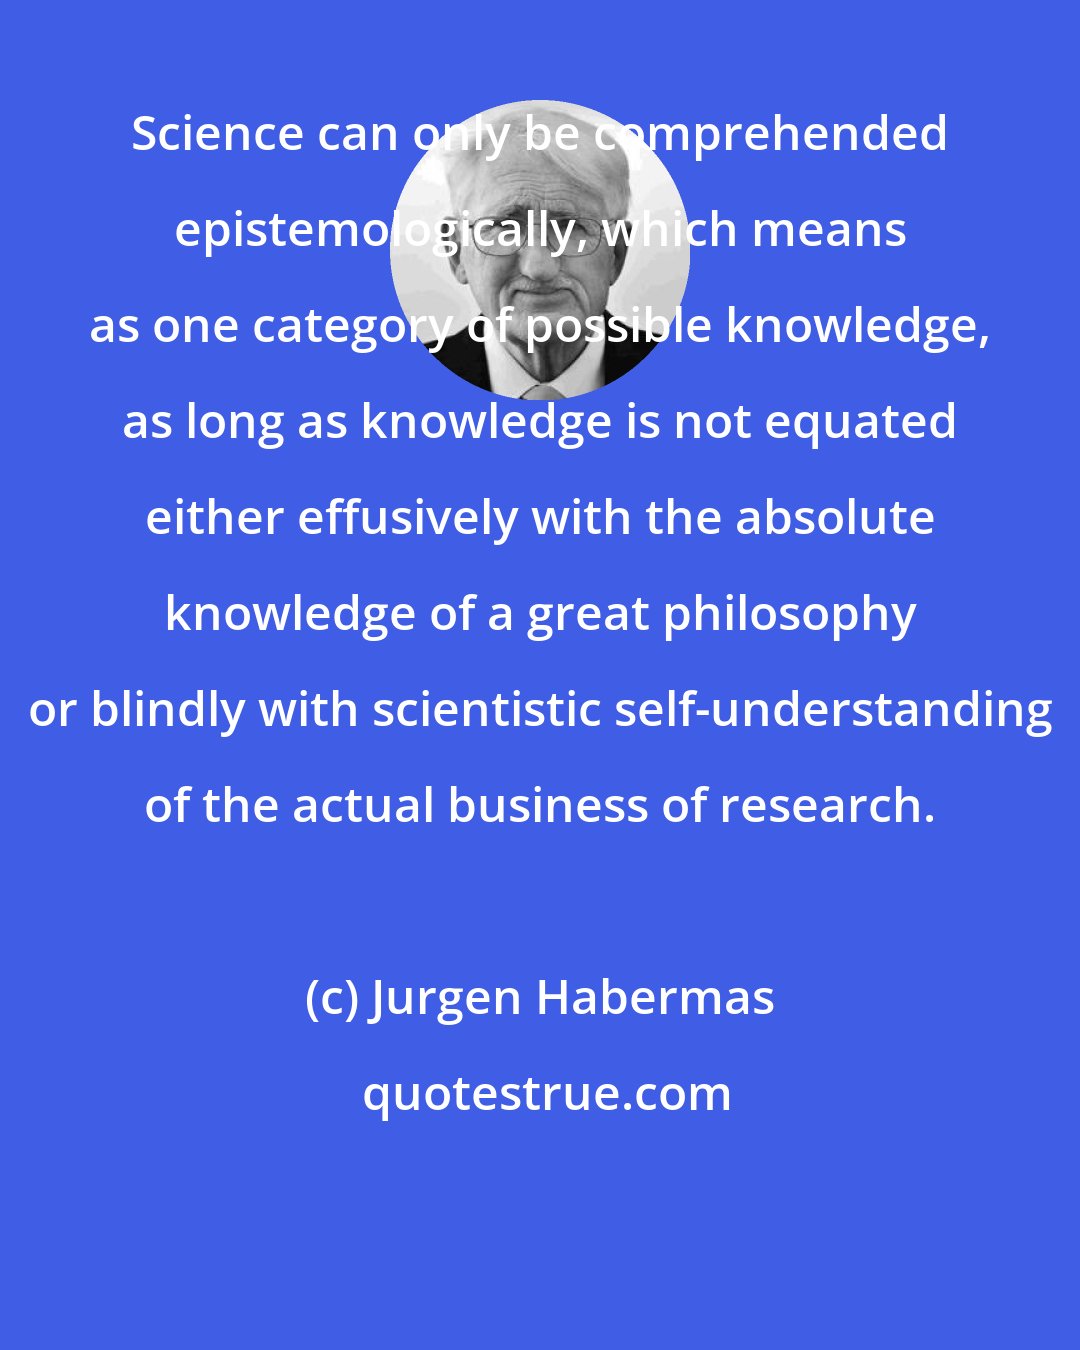 Jurgen Habermas: Science can only be comprehended epistemologically, which means as one category of possible knowledge, as long as knowledge is not equated either effusively with the absolute knowledge of a great philosophy or blindly with scientistic self-understanding of the actual business of research.